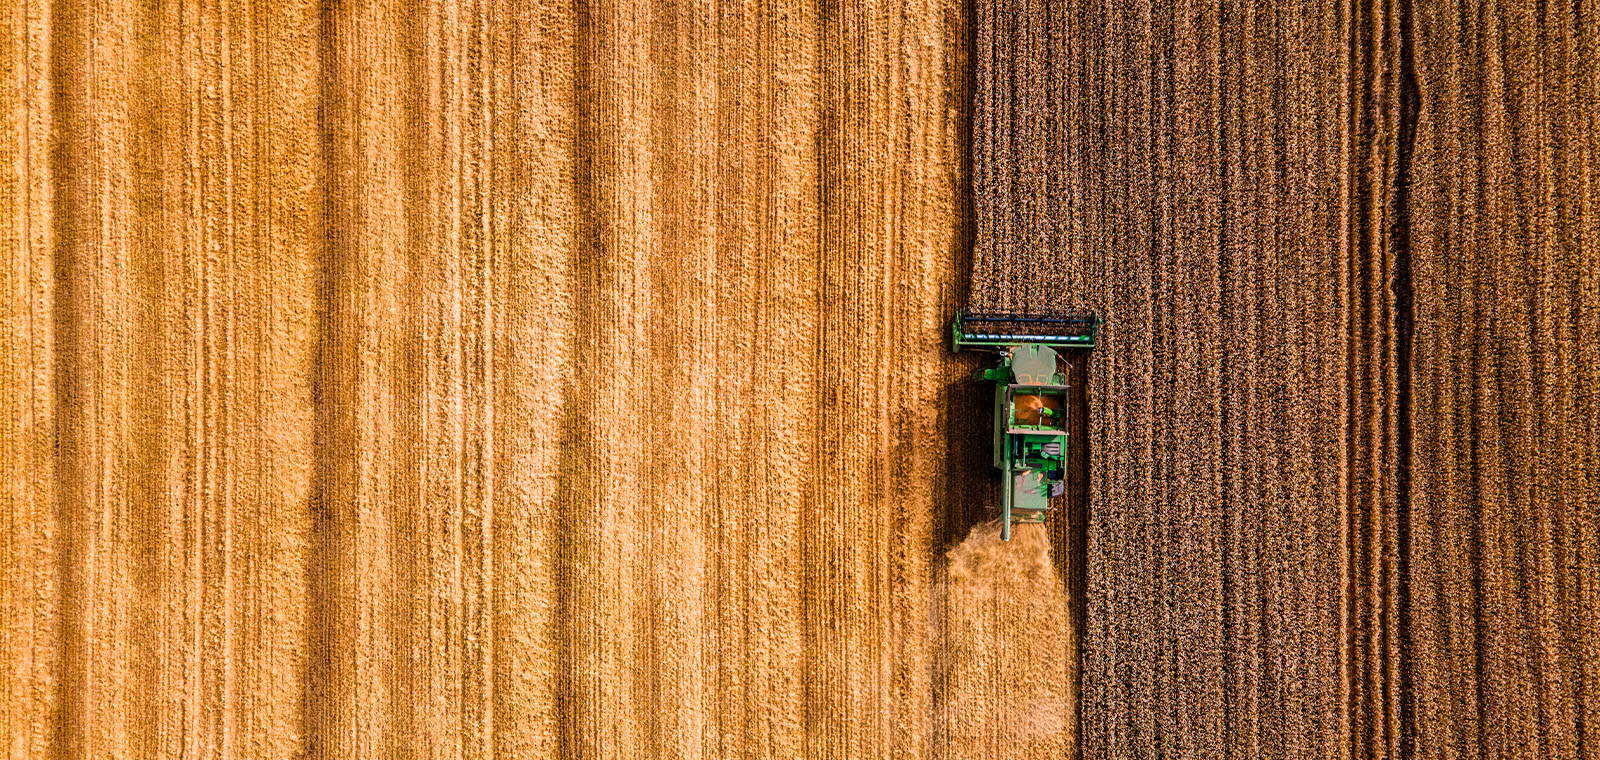 Aerial view of a grain harvester making its way through a field of wheat.